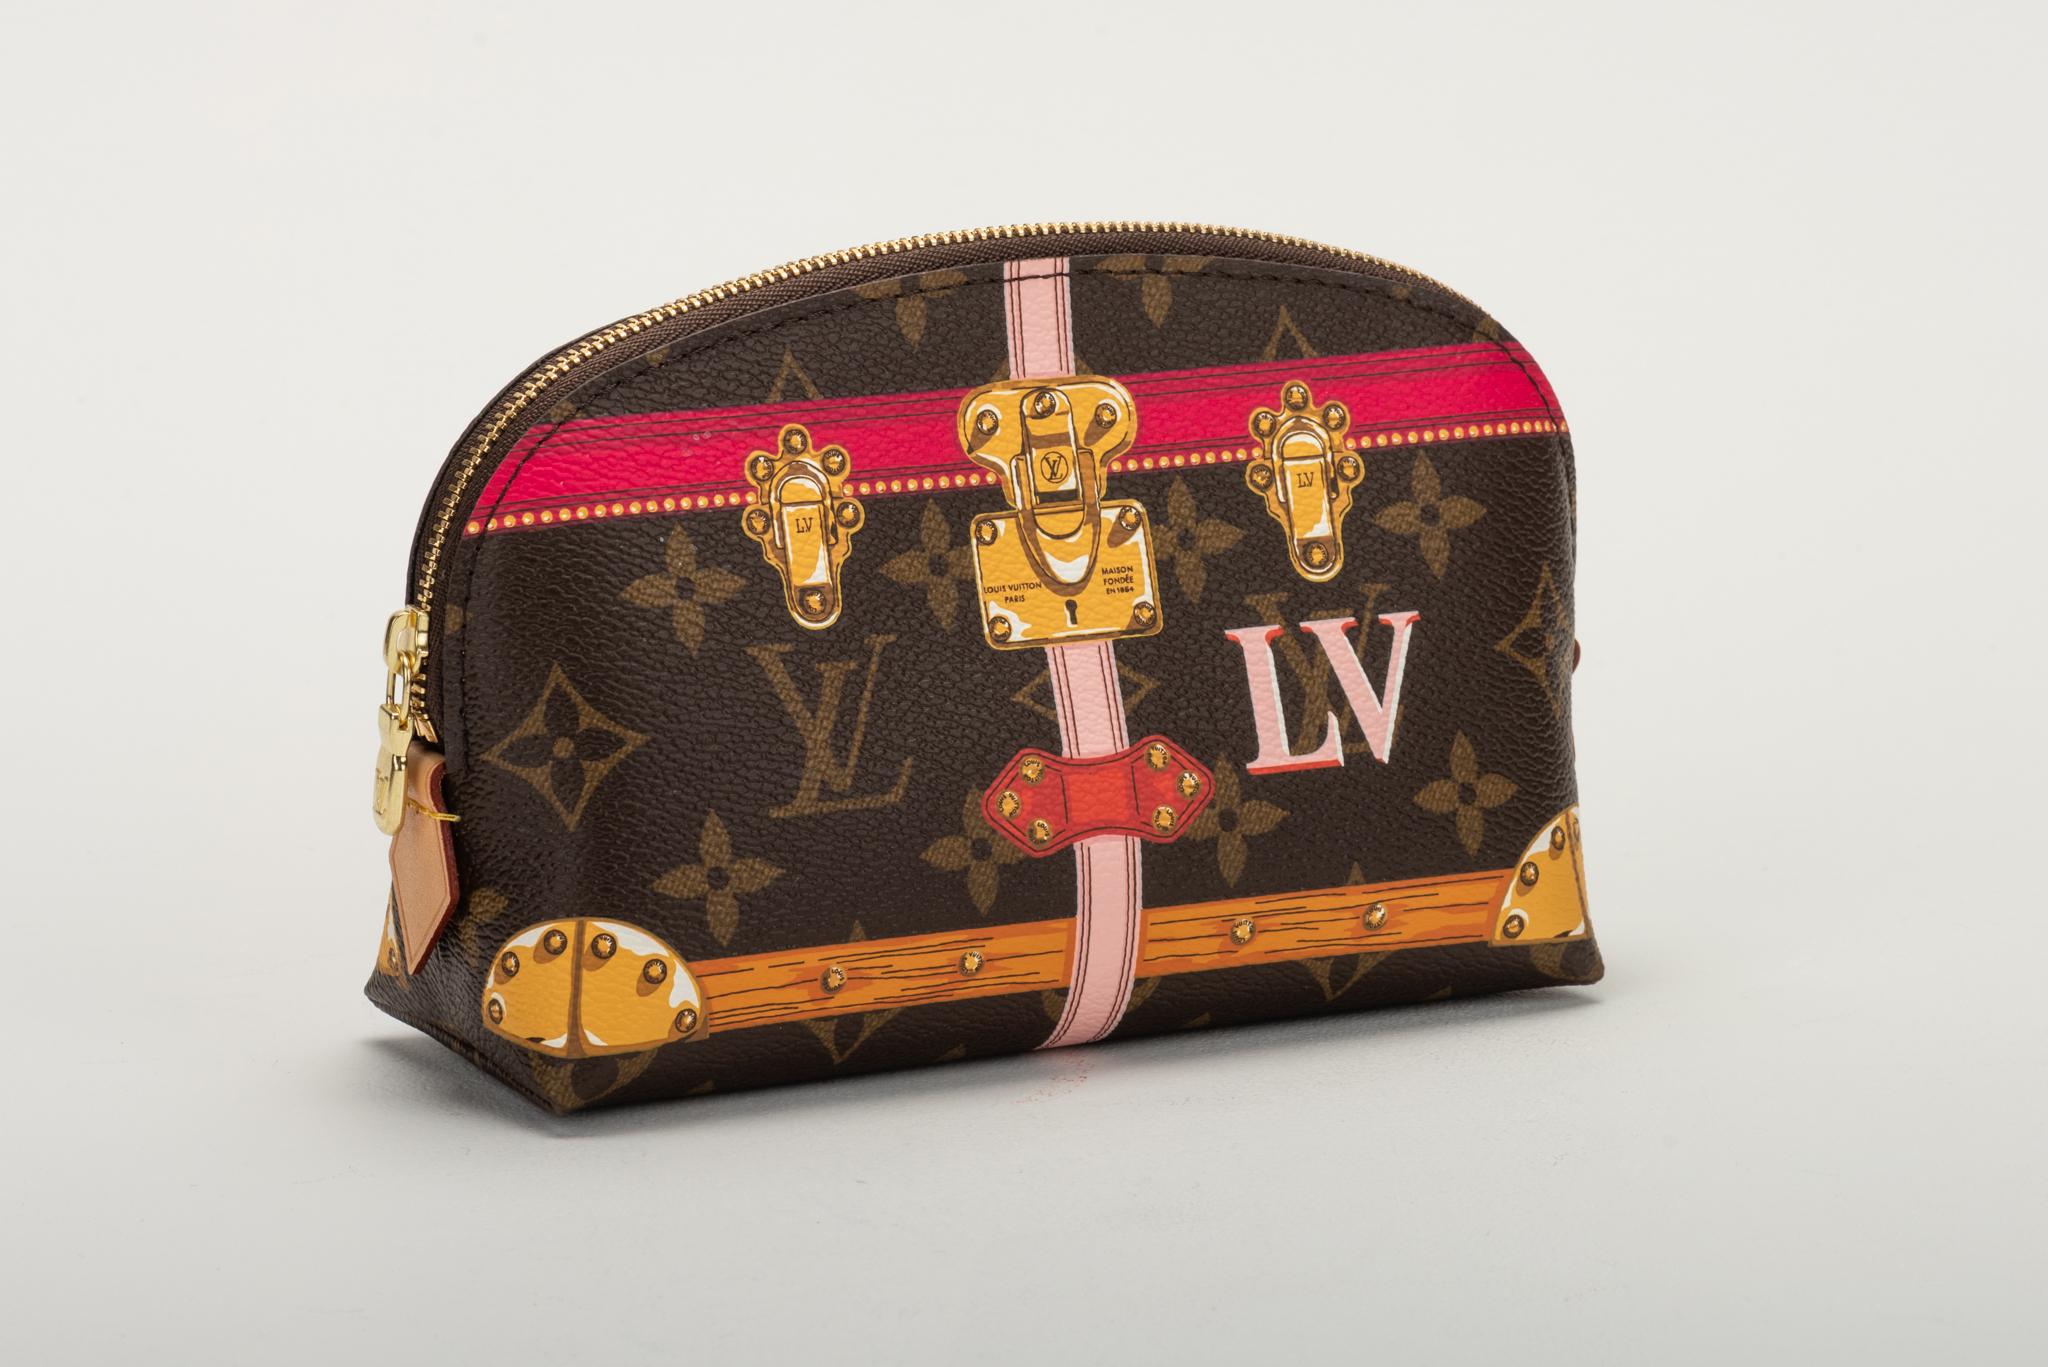 Louis Vuitton canvas monogram trunk cosmetic pouch with a pink and yellow design. Brand new 2018 collection. Comes with original dust cover, box, ribbon, and shopping bag.